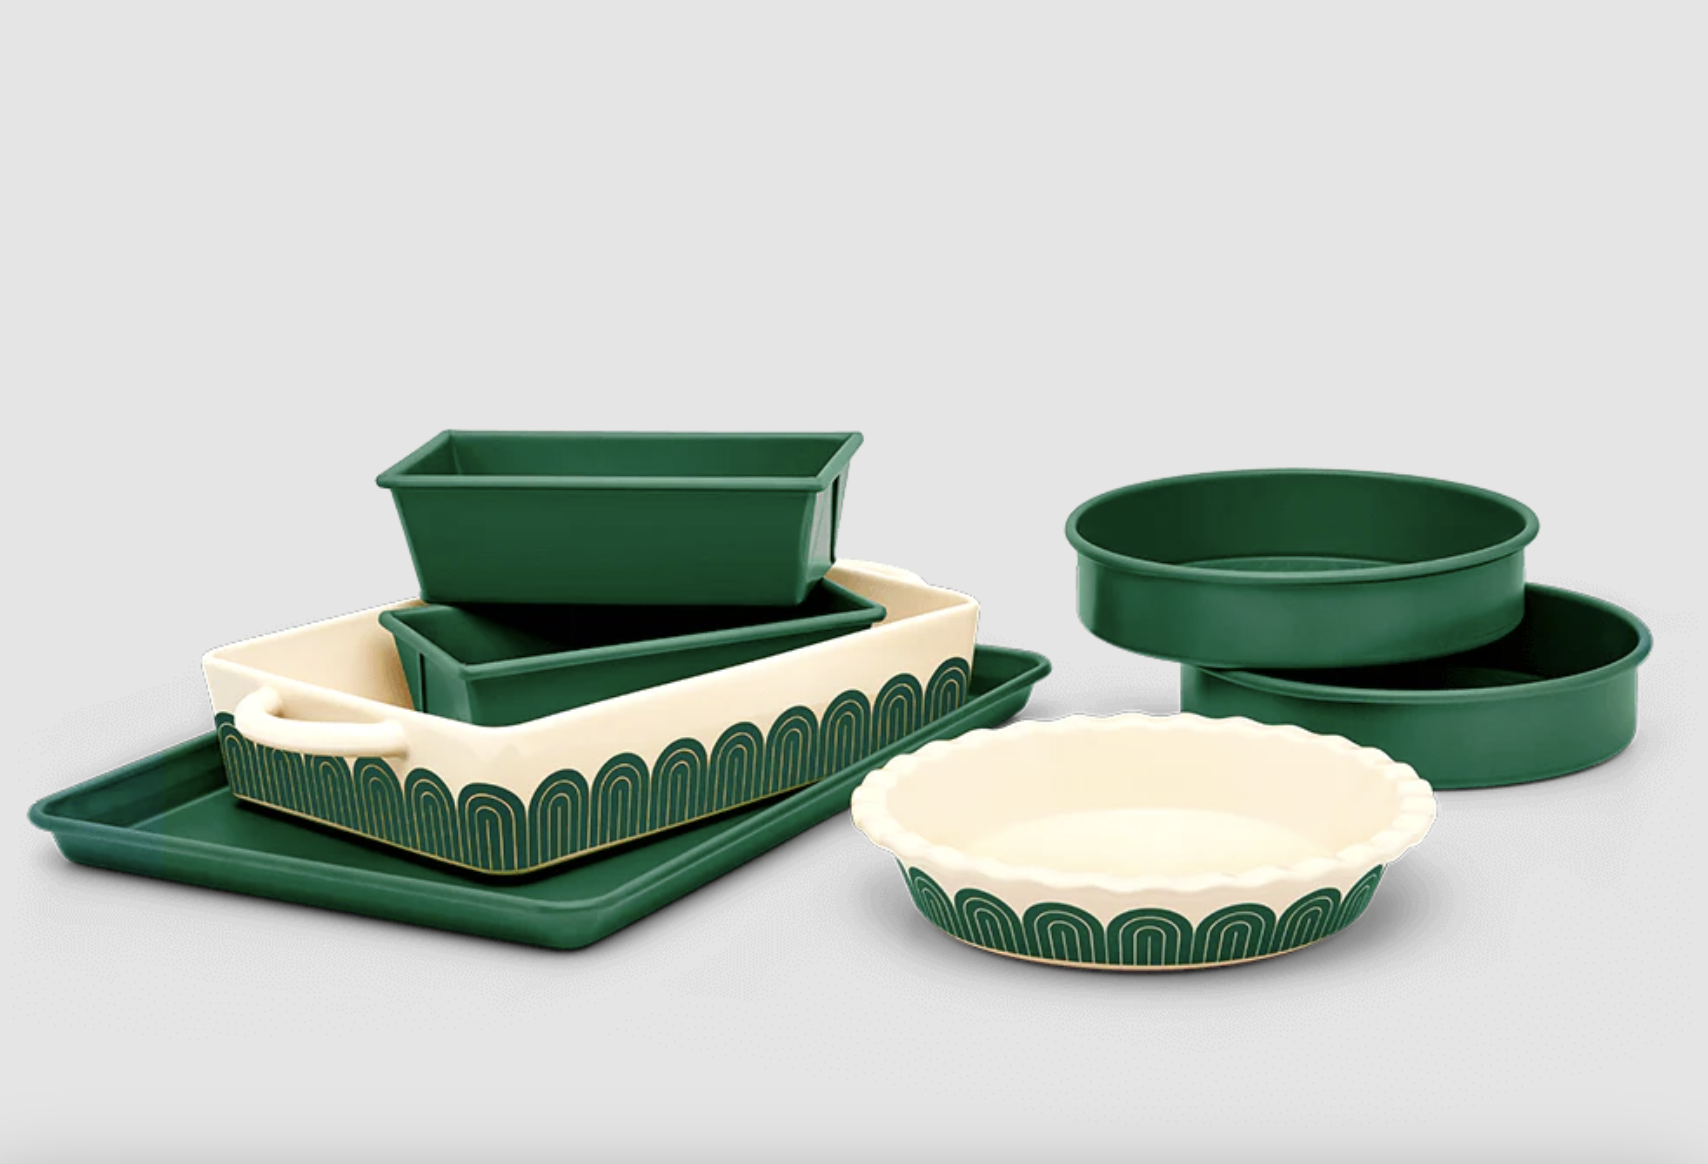 the 7-piece green and white bakeware set with a pie pan, large cookie sheet, square baking dish, and more